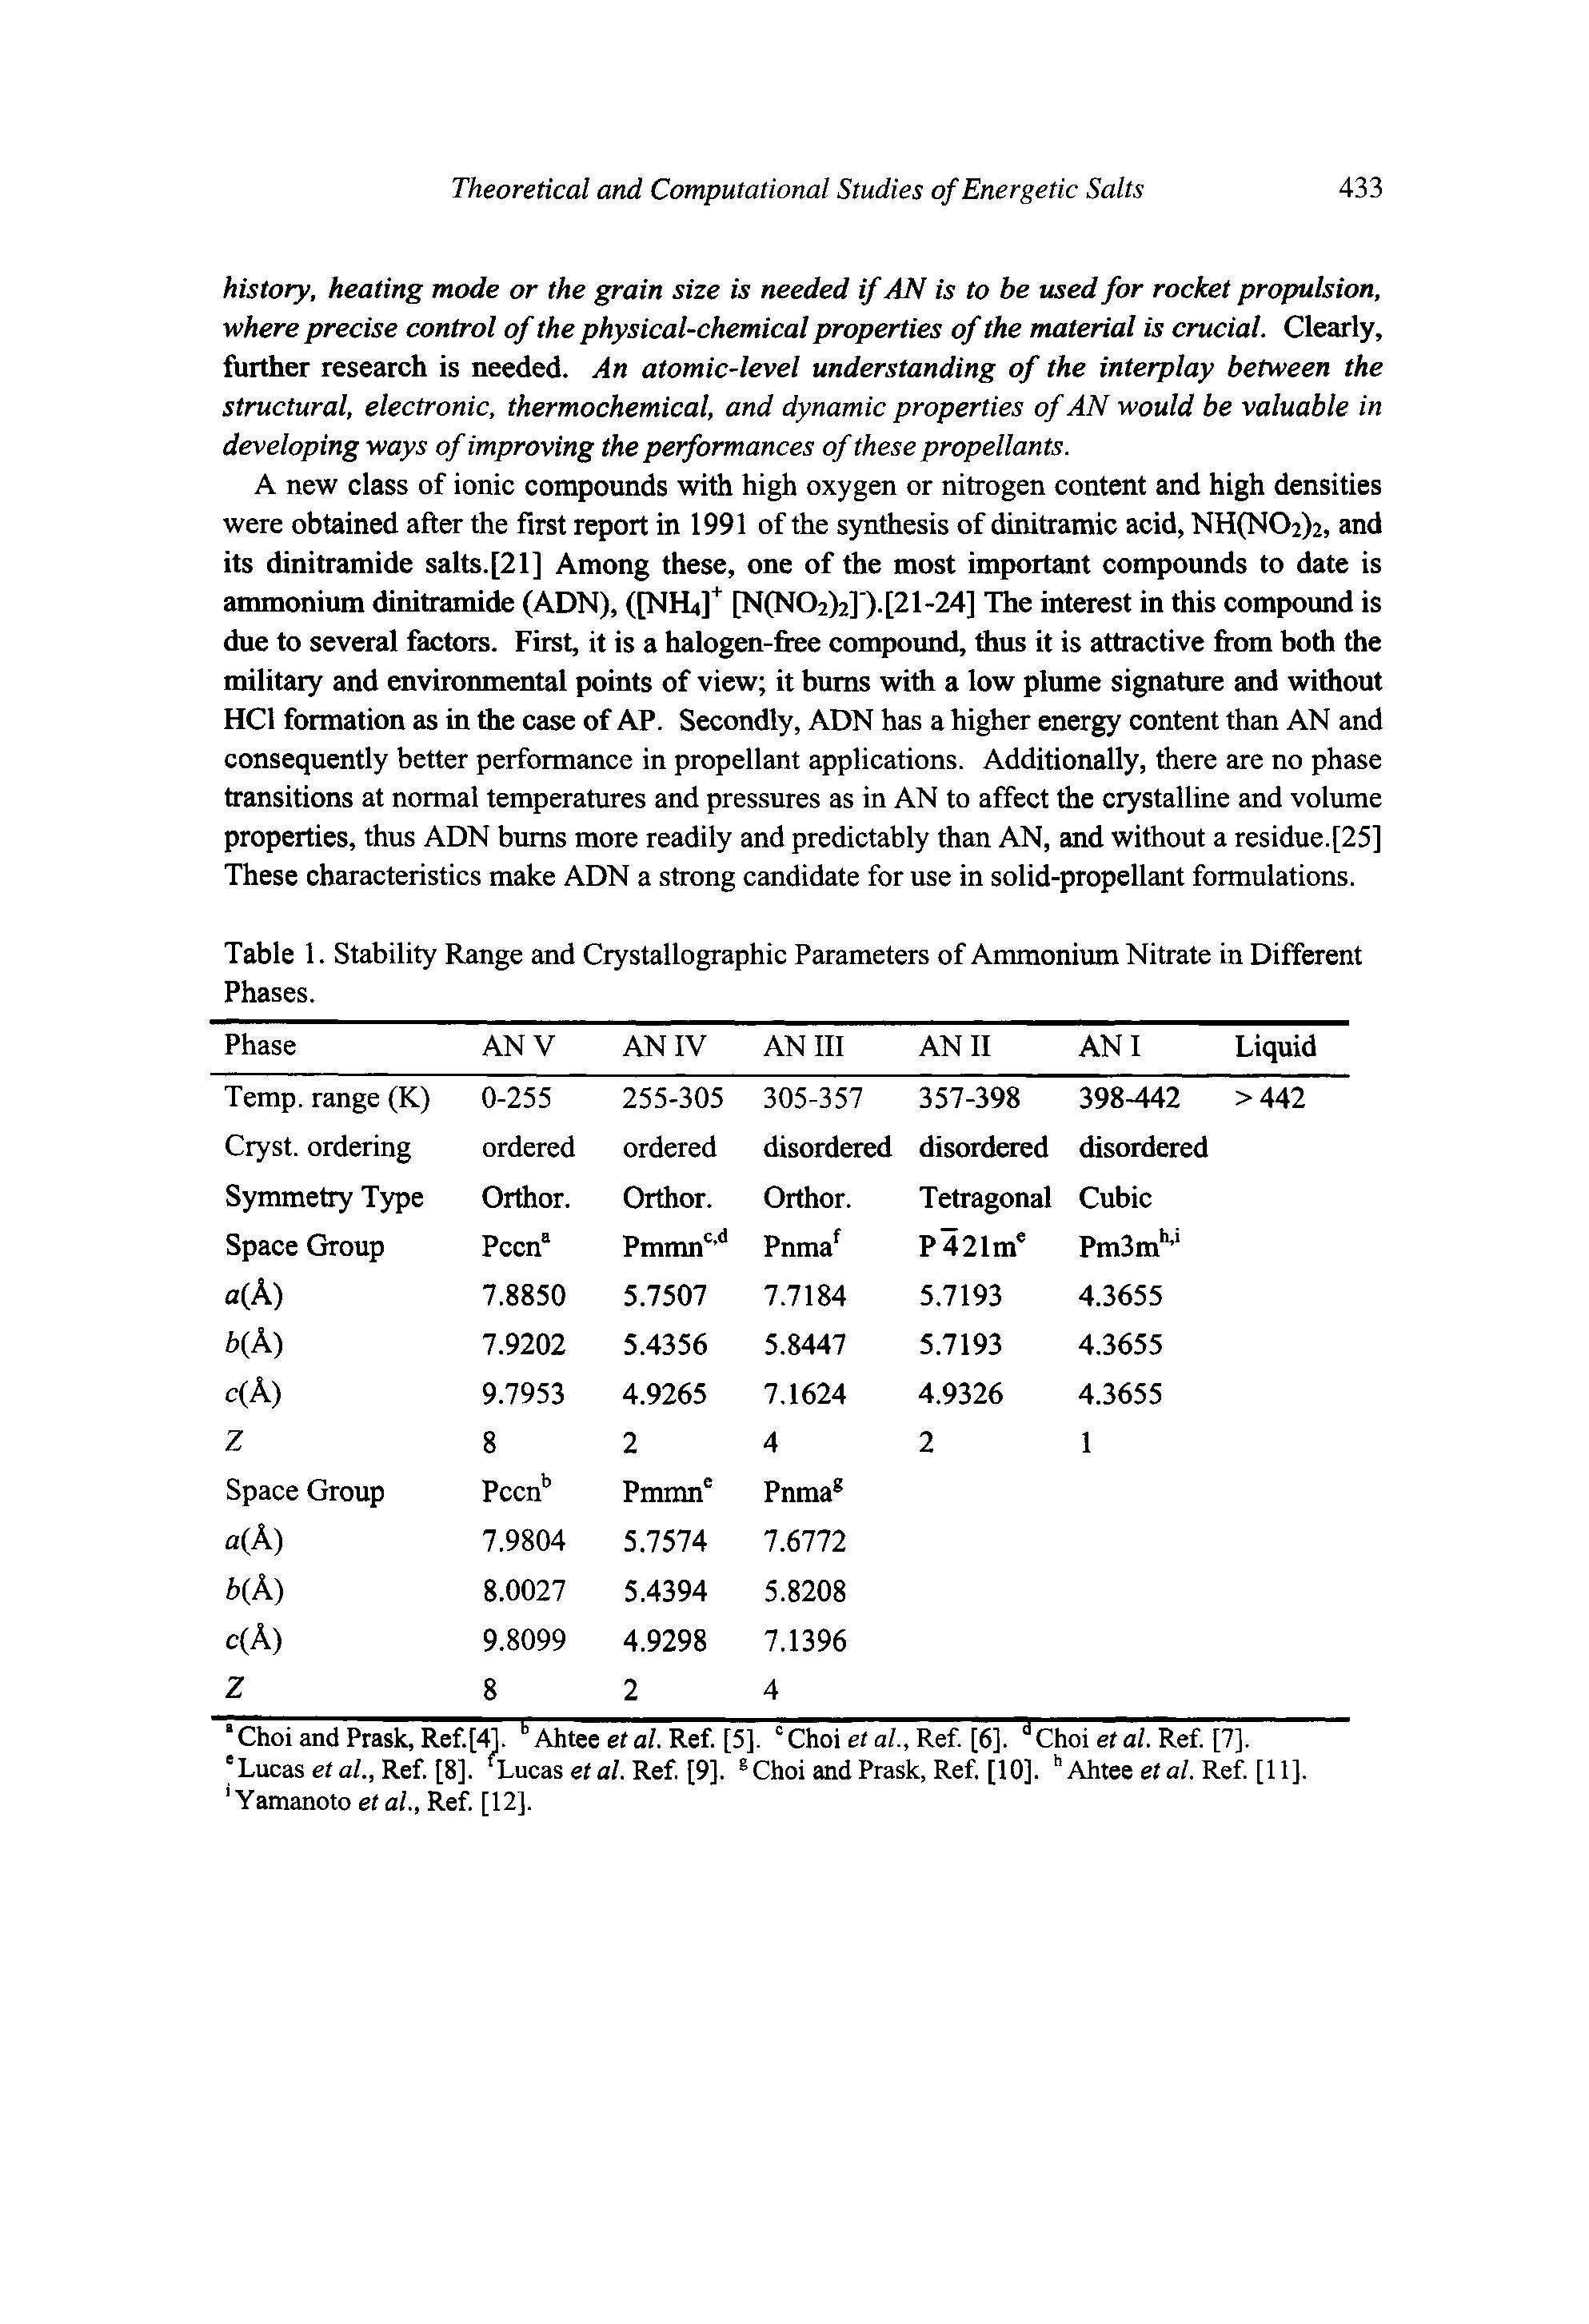 Table 1. Stability Range and Crystallographic Parameters of Ammonium Nitrate in Different Phases.